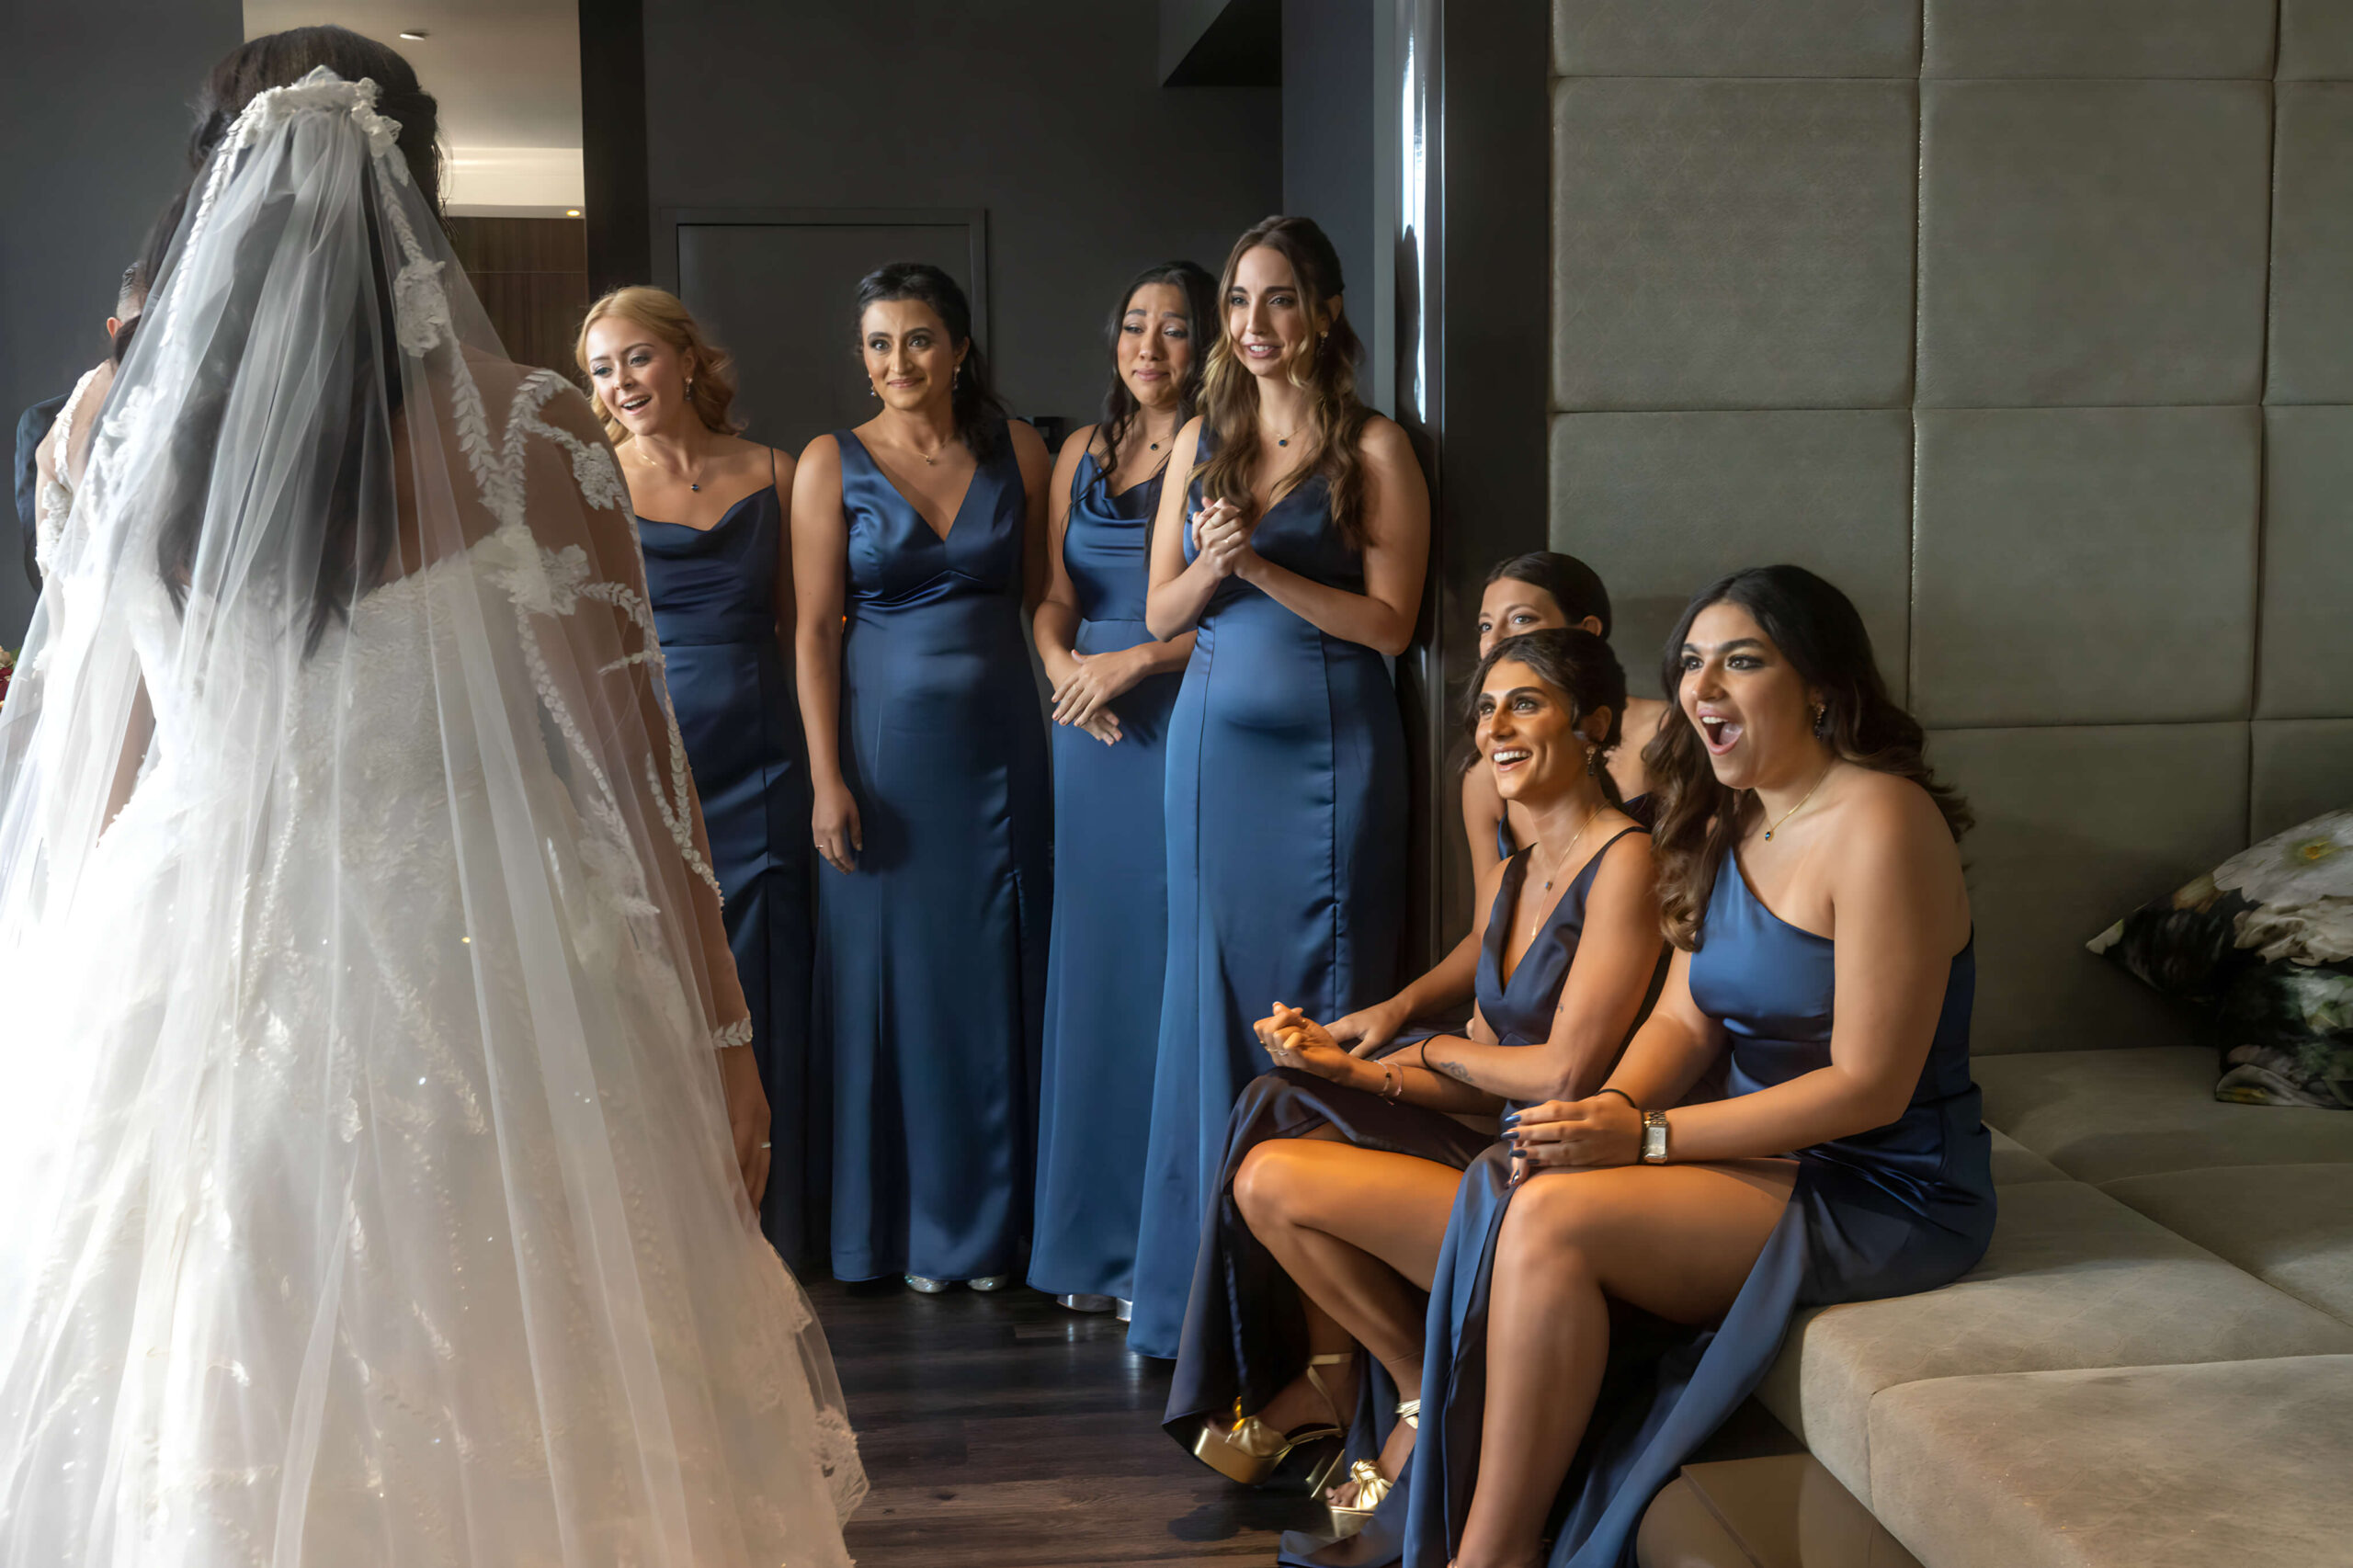 bride first look dress reveal with bridesmaids